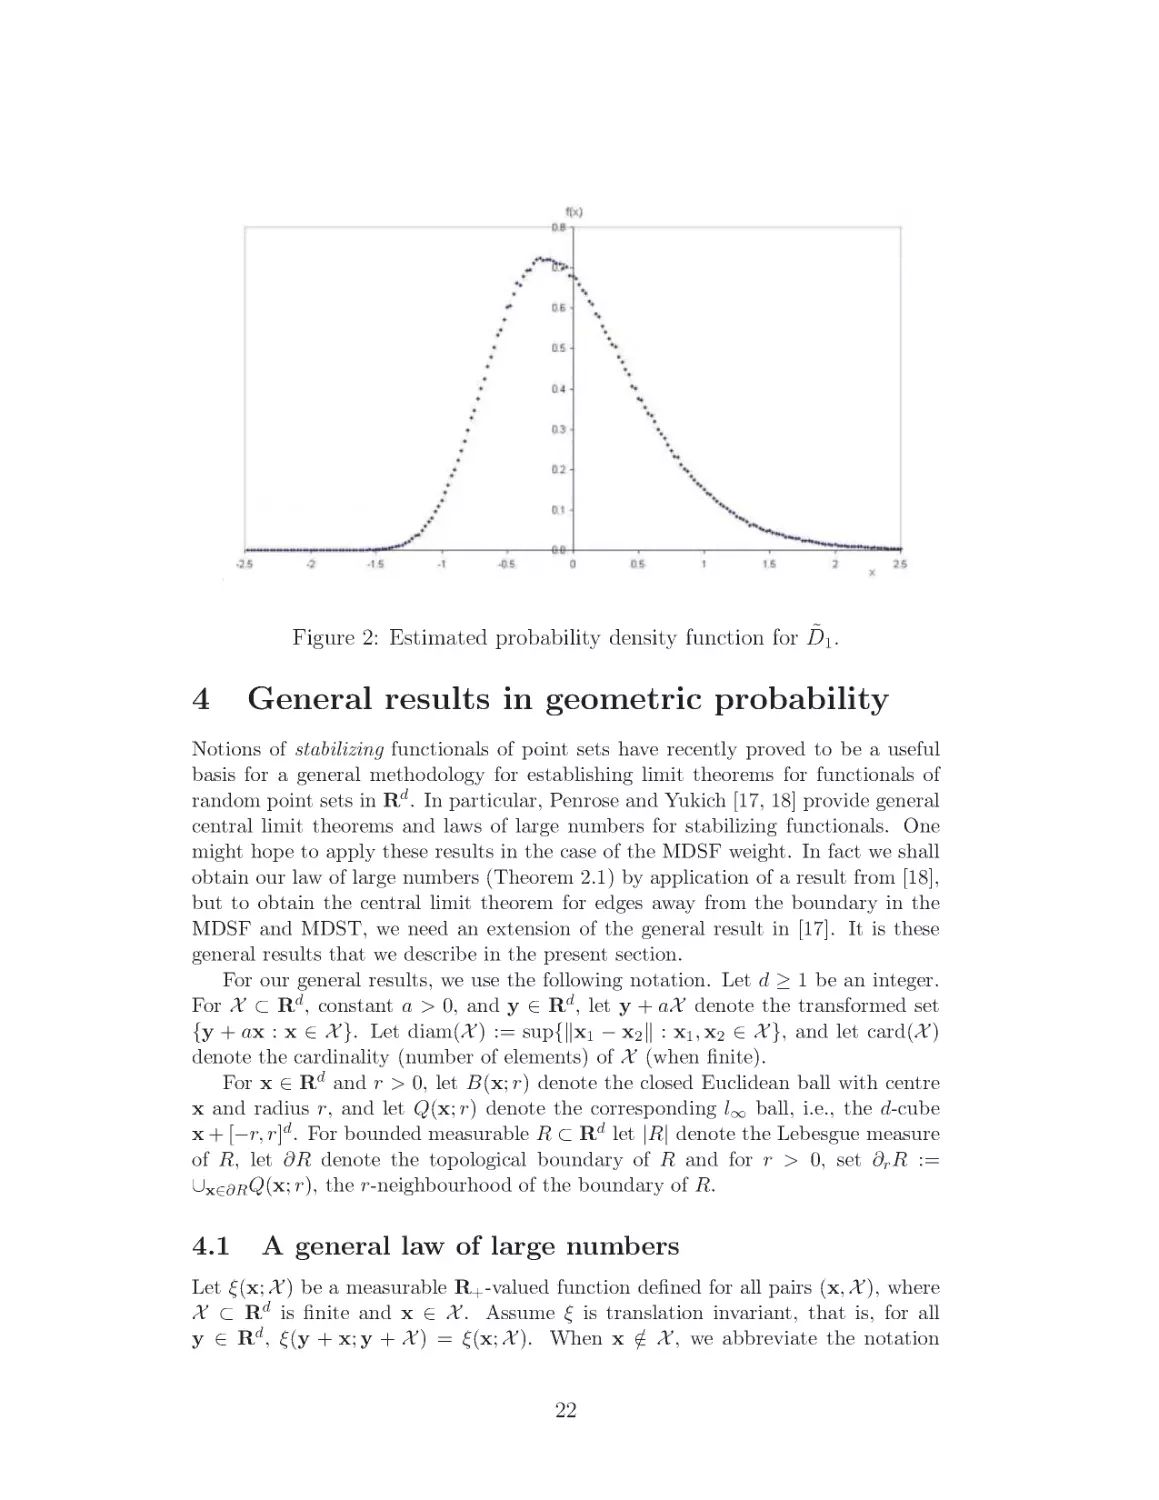 General results in geometric probability